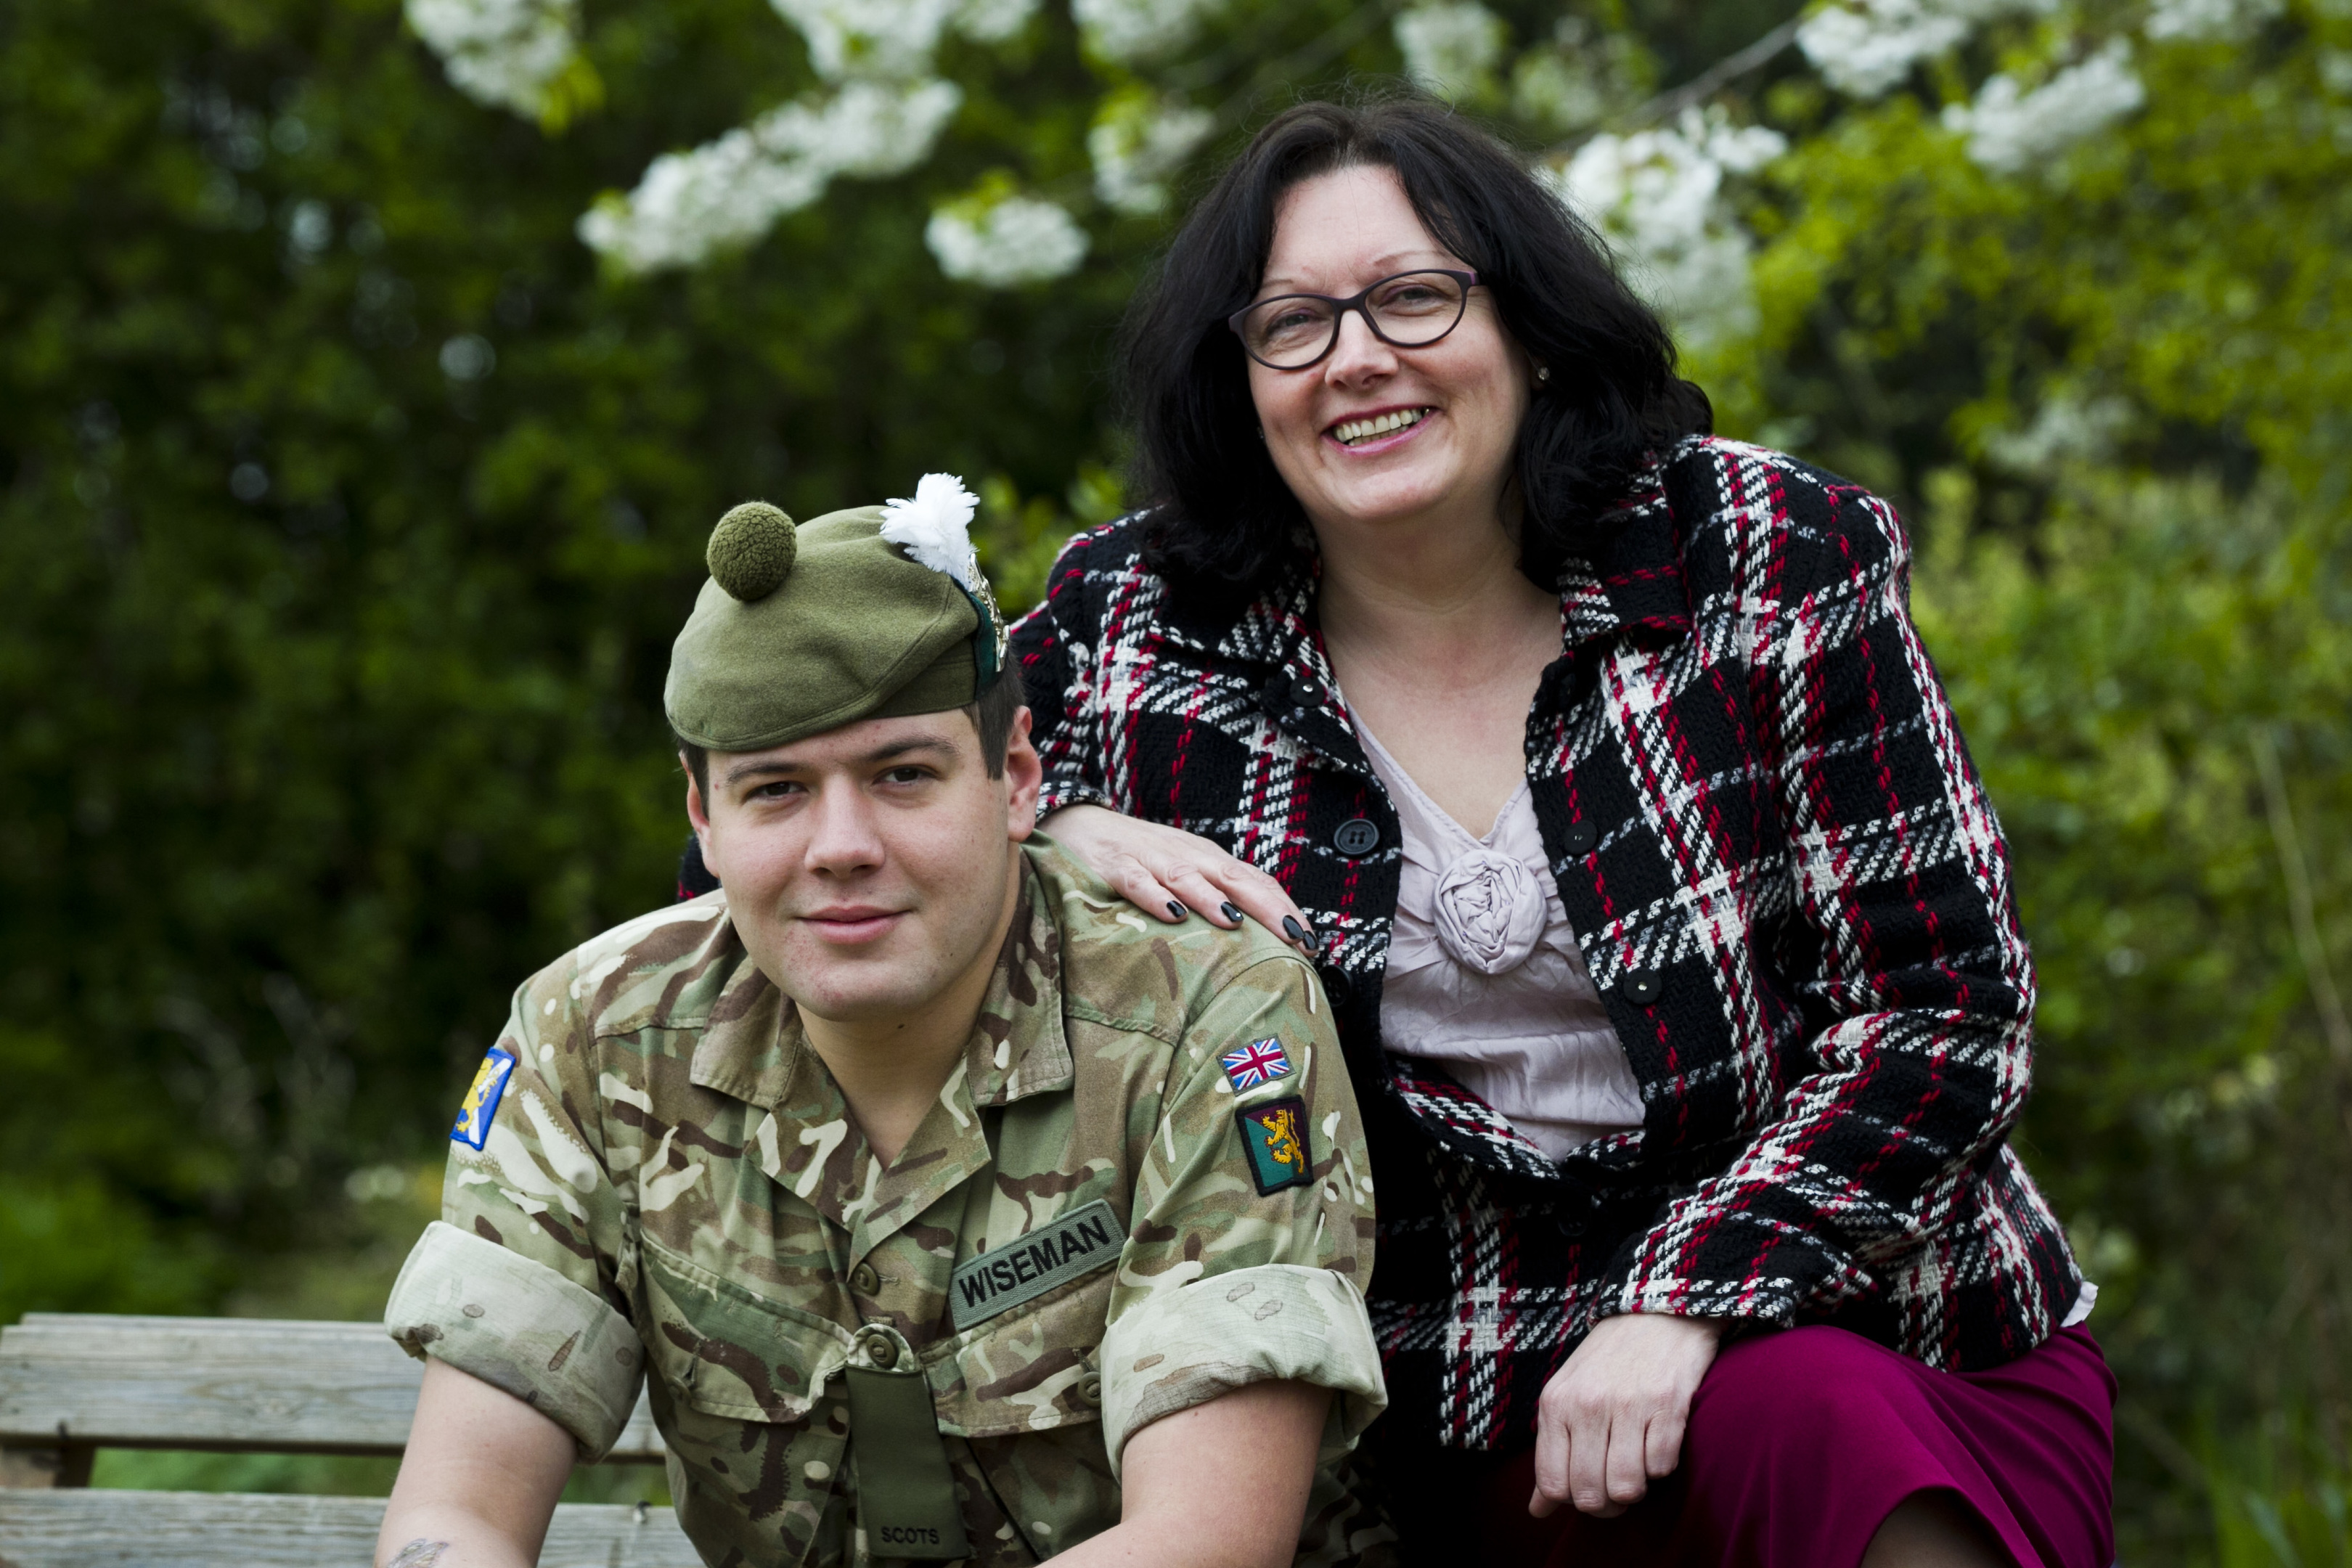 Lynne Carruthers, and her son, Sean Wiseman, who lost a leg while on tour with the Army, in Afghanistan. (Andrew Cawley)